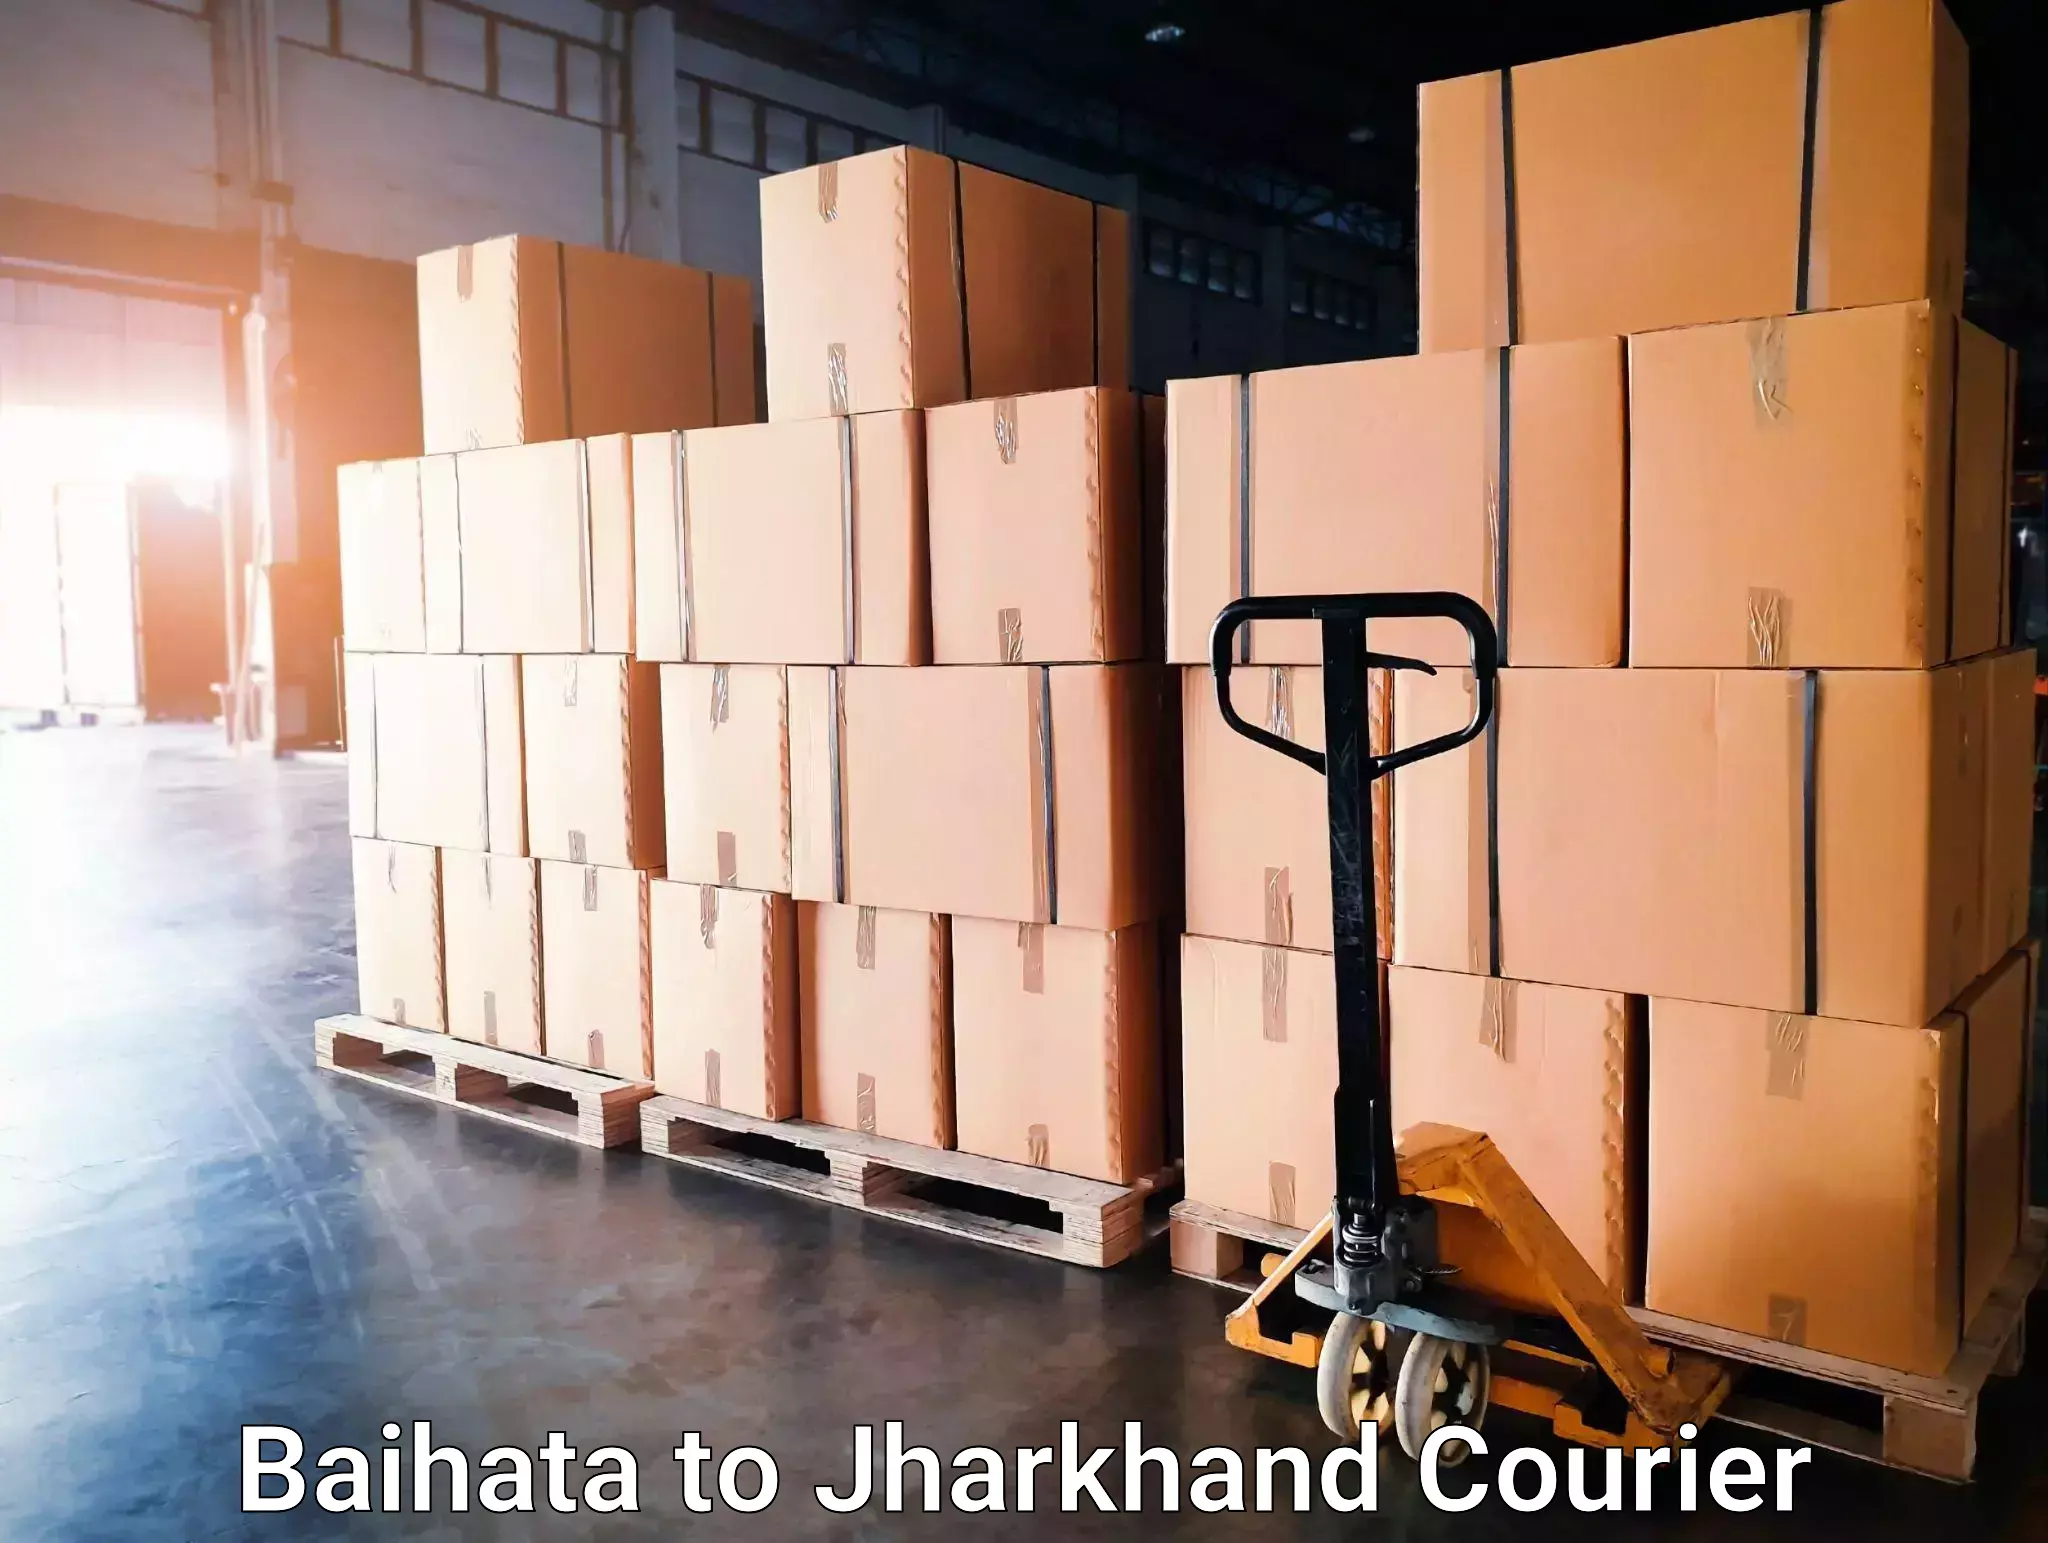 Emergency parcel delivery in Baihata to Hazaribagh